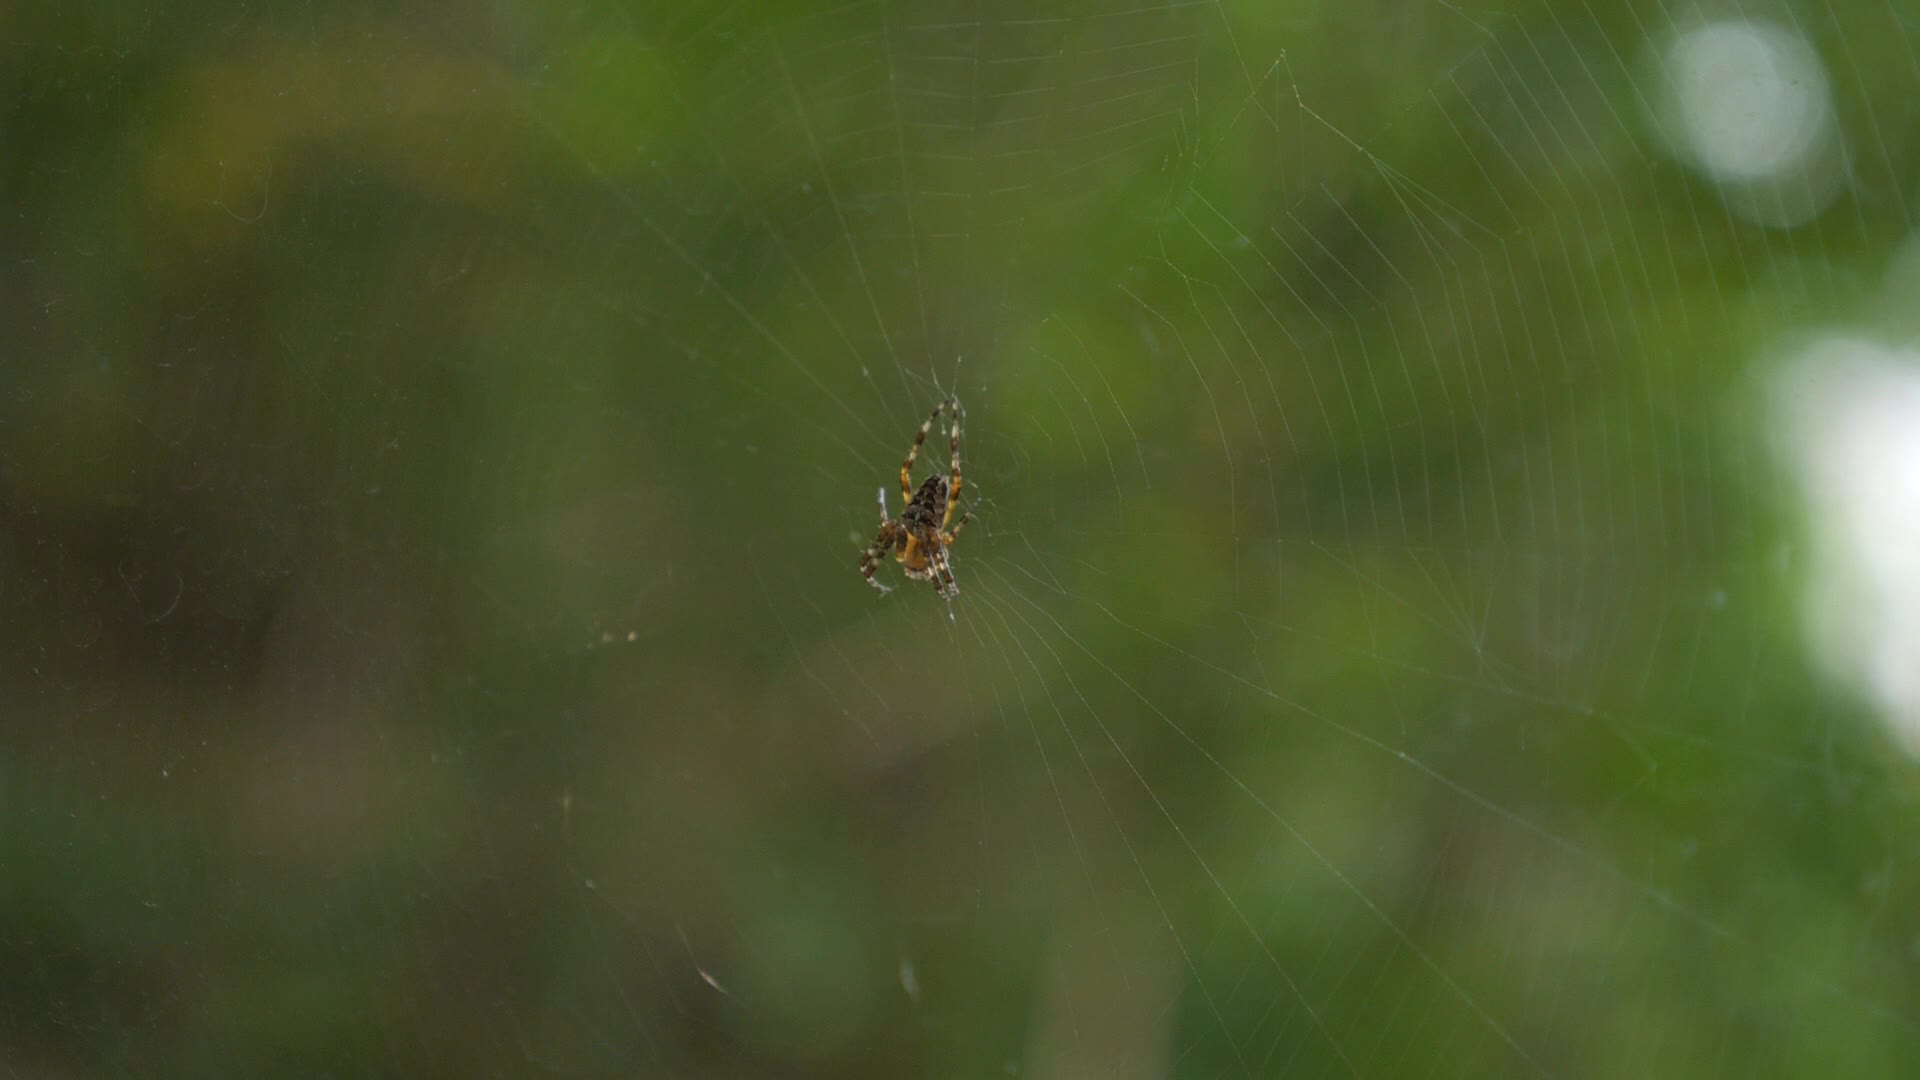 Spider Shaking its Web